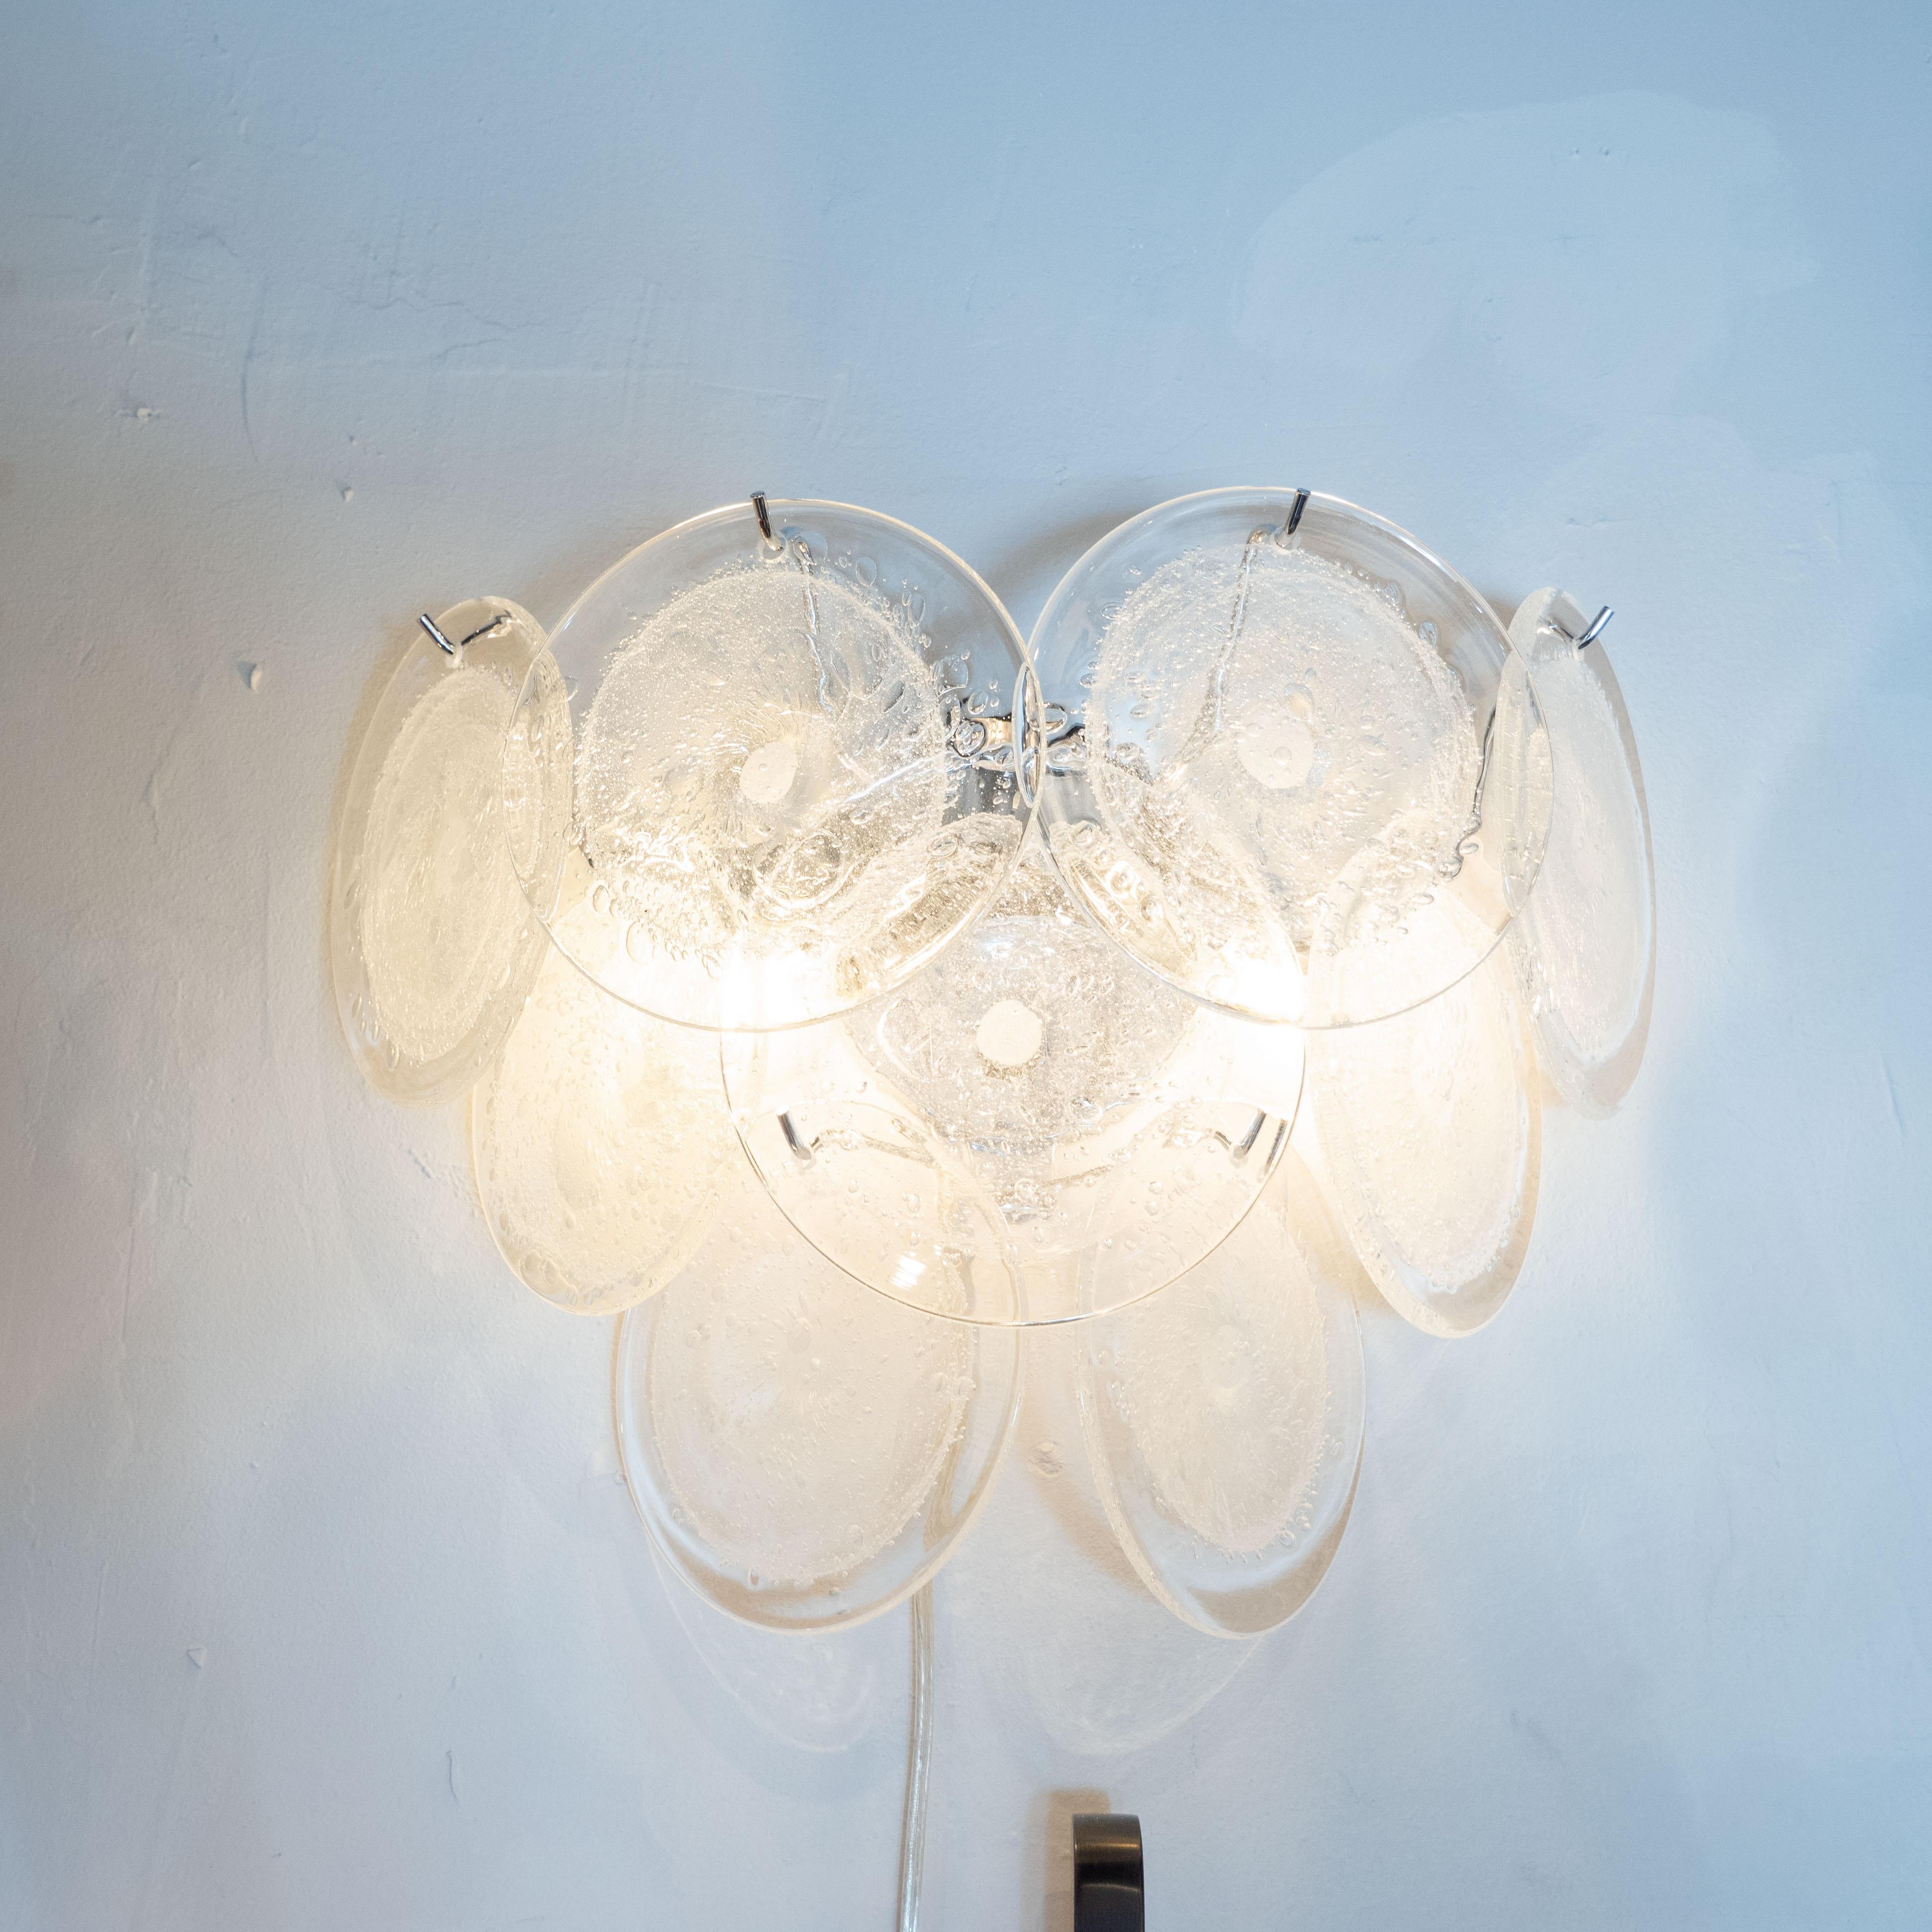 This beautiful pair of modernist 9-disc Vistosi sconces were made exclusively for high style deco by our atelier in Murano, Italy- the island off the coast of Venice, renowned for centuries for its superlative glass production. Realized in the